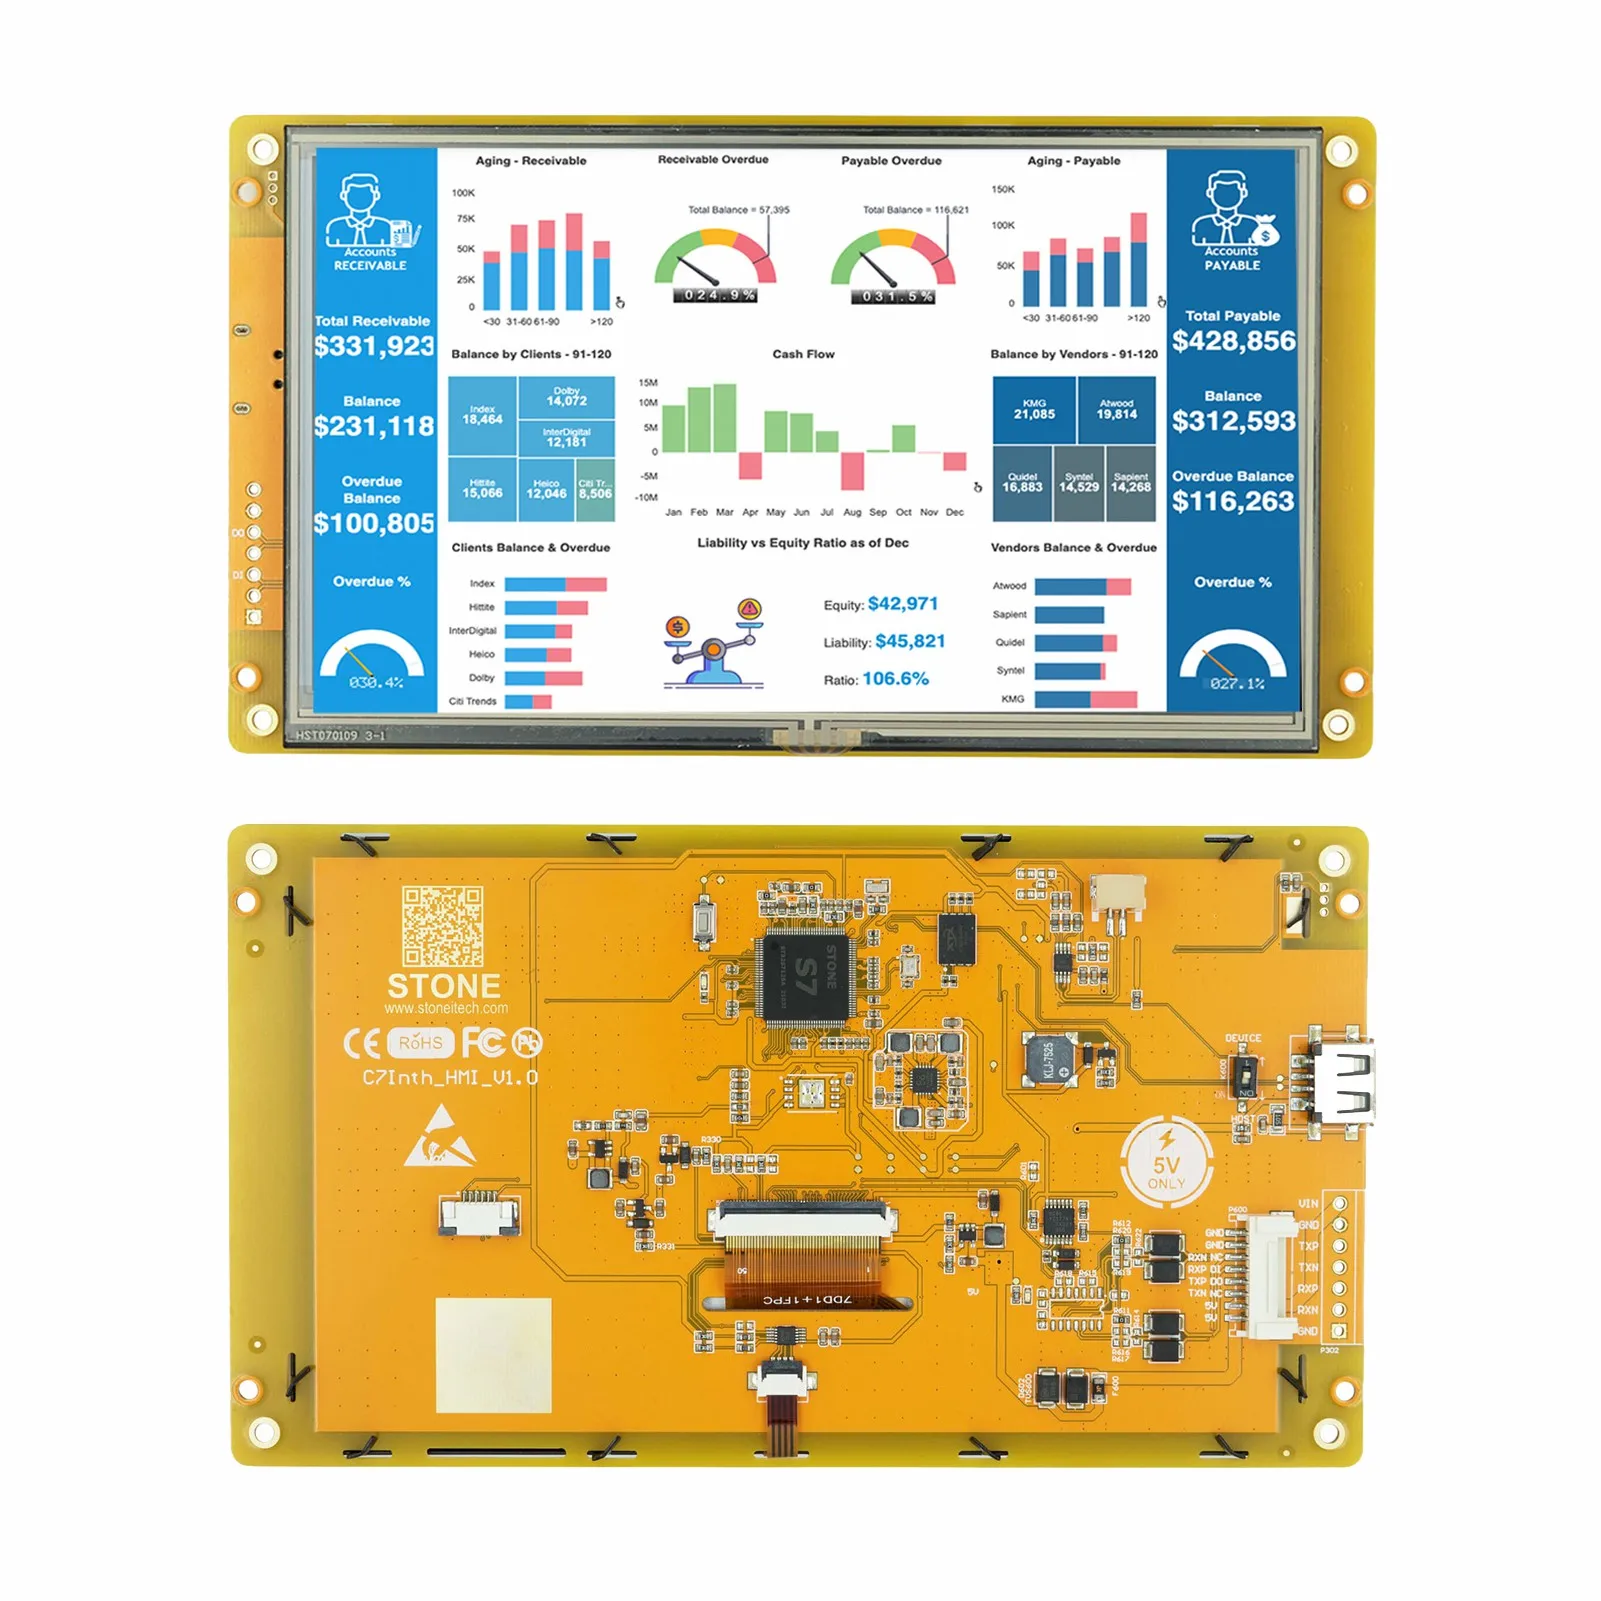 7 Inch LCD-TFT HMI Display Module Intelligent Series RGB 262K Color Resistive Touch Panel for Industrial Equipment Control